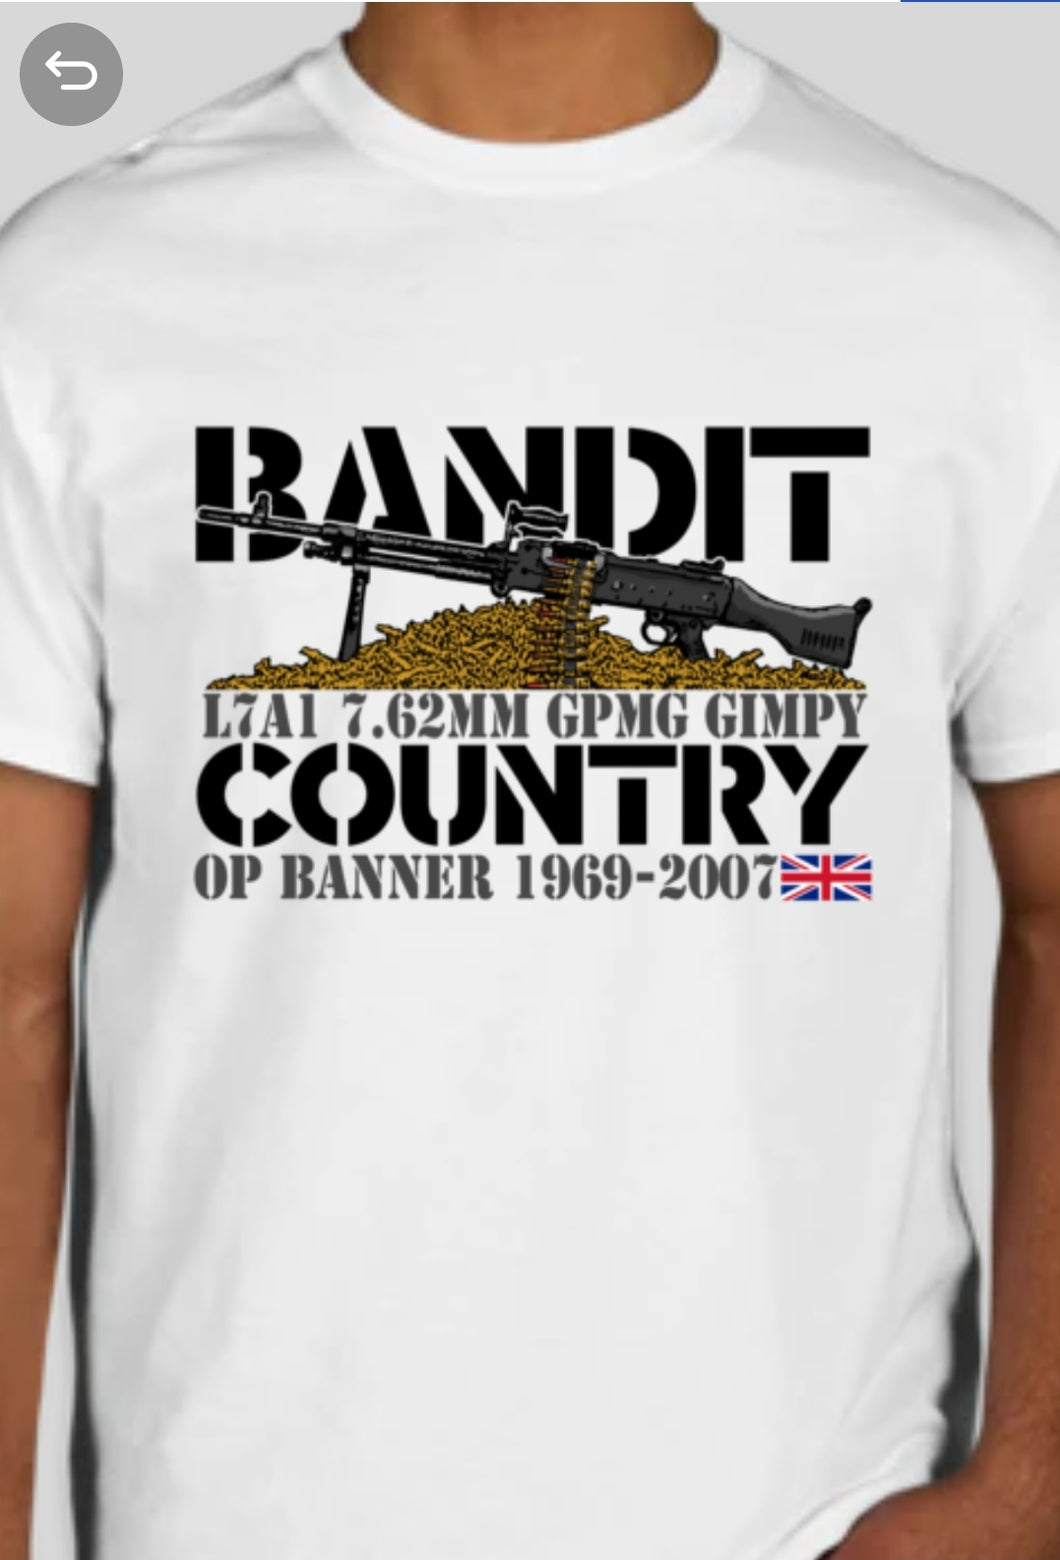 Military Humor - Bandit Country - Op Banner - Military Humor Stores